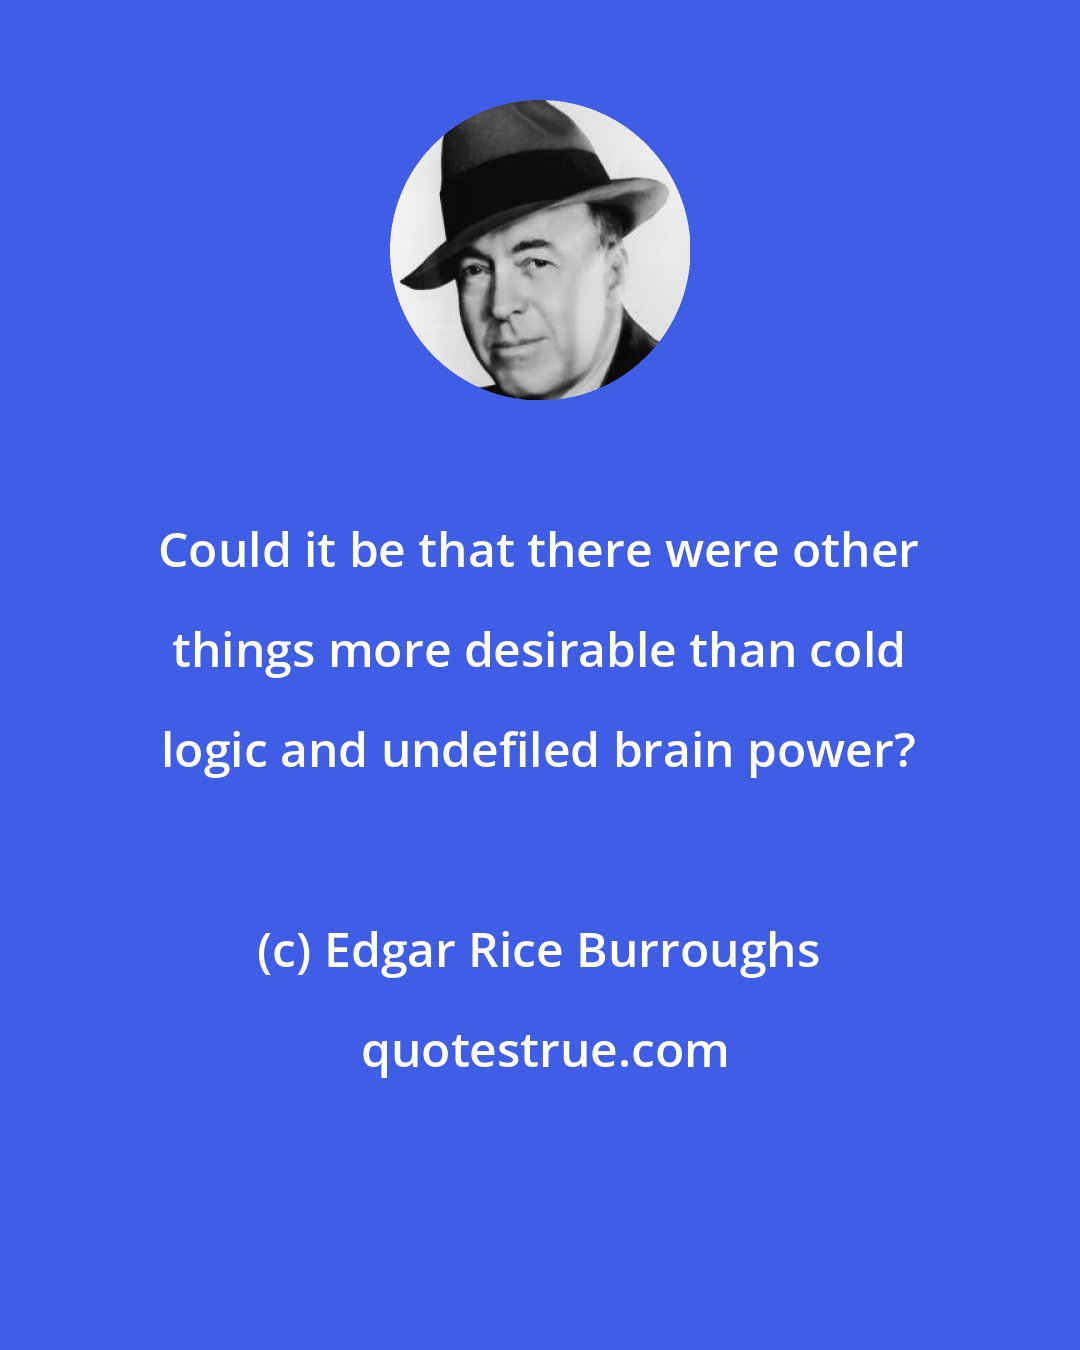 Edgar Rice Burroughs: Could it be that there were other things more desirable than cold logic and undefiled brain power?